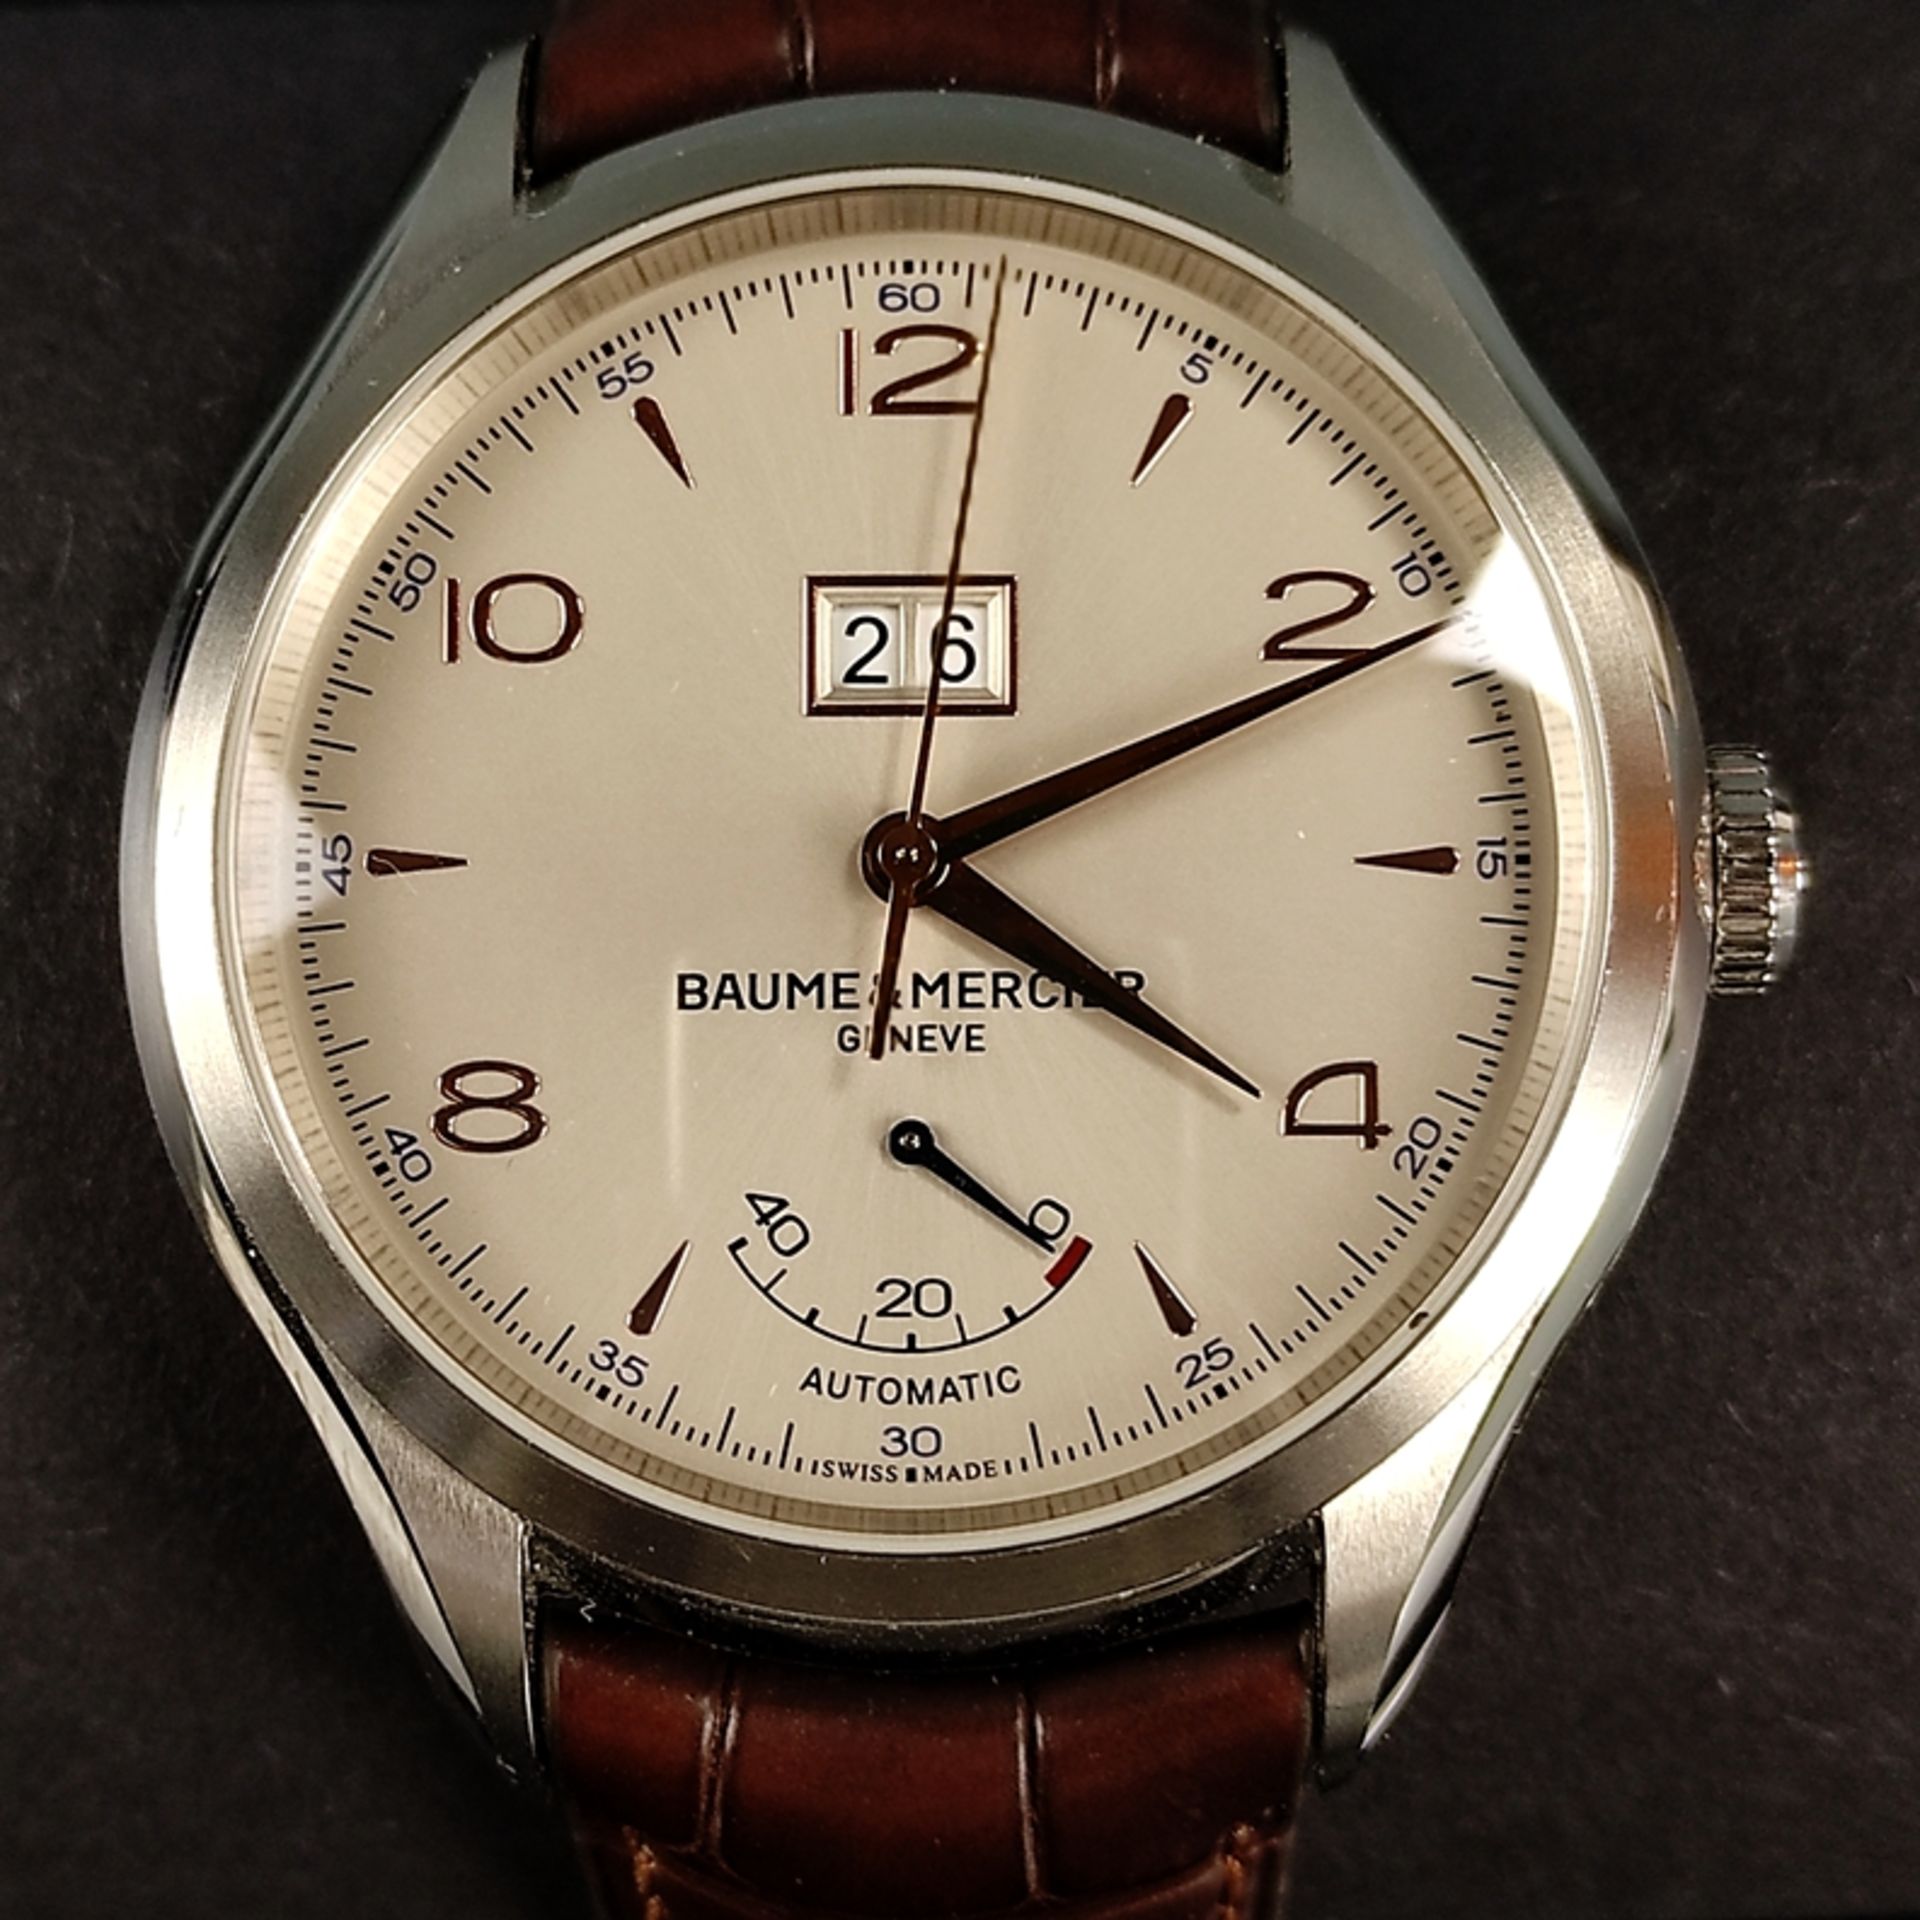 Wristwatch, Baume & Mercier, Clifton 10205, automatic with power reserve up to 42 hours, elegant th - Image 2 of 4